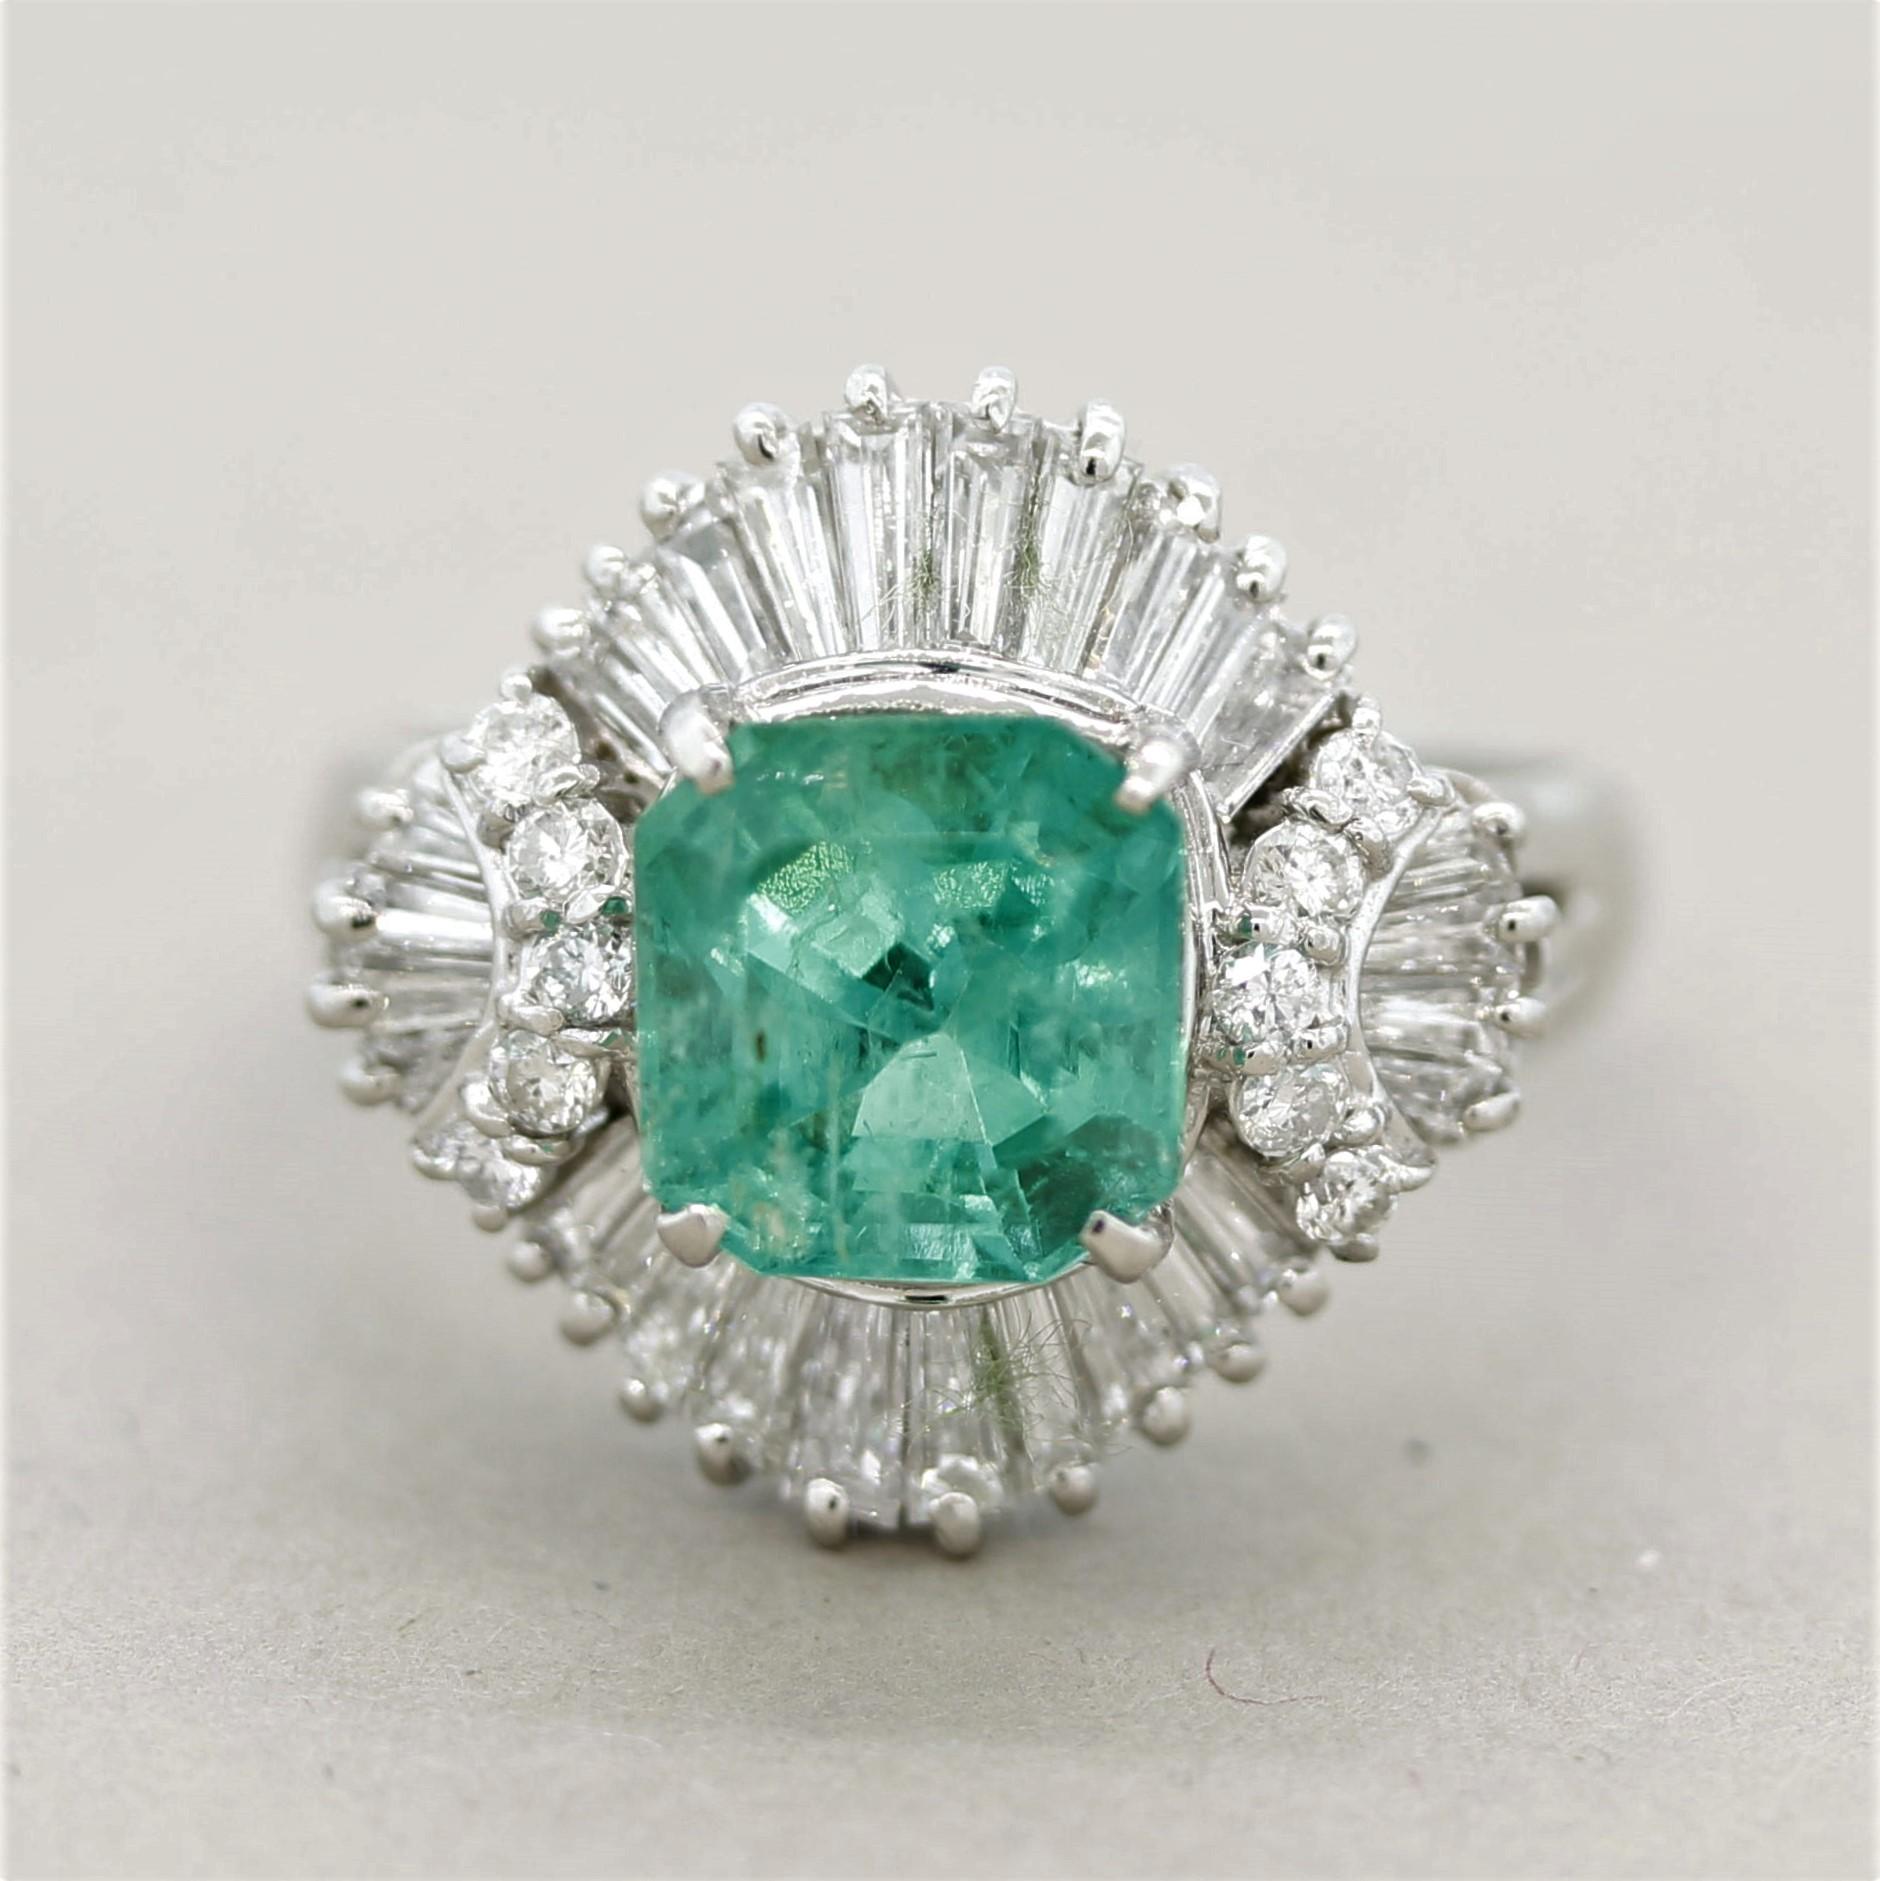 A luxurious and fine platinum ring! It features a 2.38 carat square-shaped emerald-cut emerald with a bright and vibrant green color. It is accented by 1.29 carats of round brilliant-cut and baguette-cut diamonds set in a stylish pattern around the